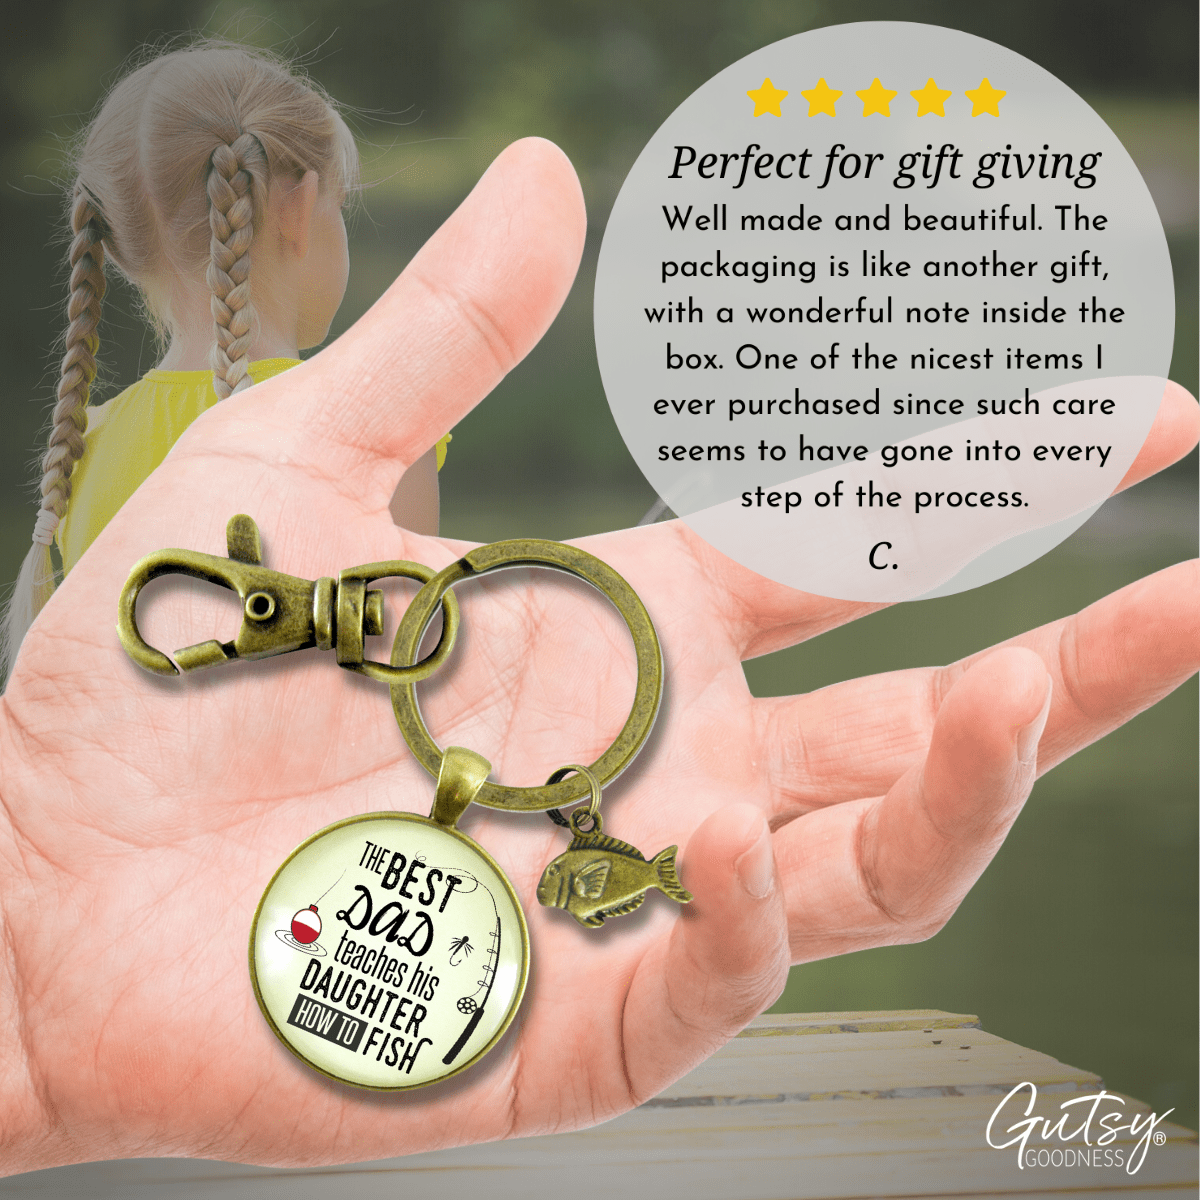 TheFamilyGiftsCo Father's Day Gift for Dad, Fishing Gifts for Dad Keychain, Father's Day Gift from Daughter, Dad Gifts, Fathers Day Gift Fishing